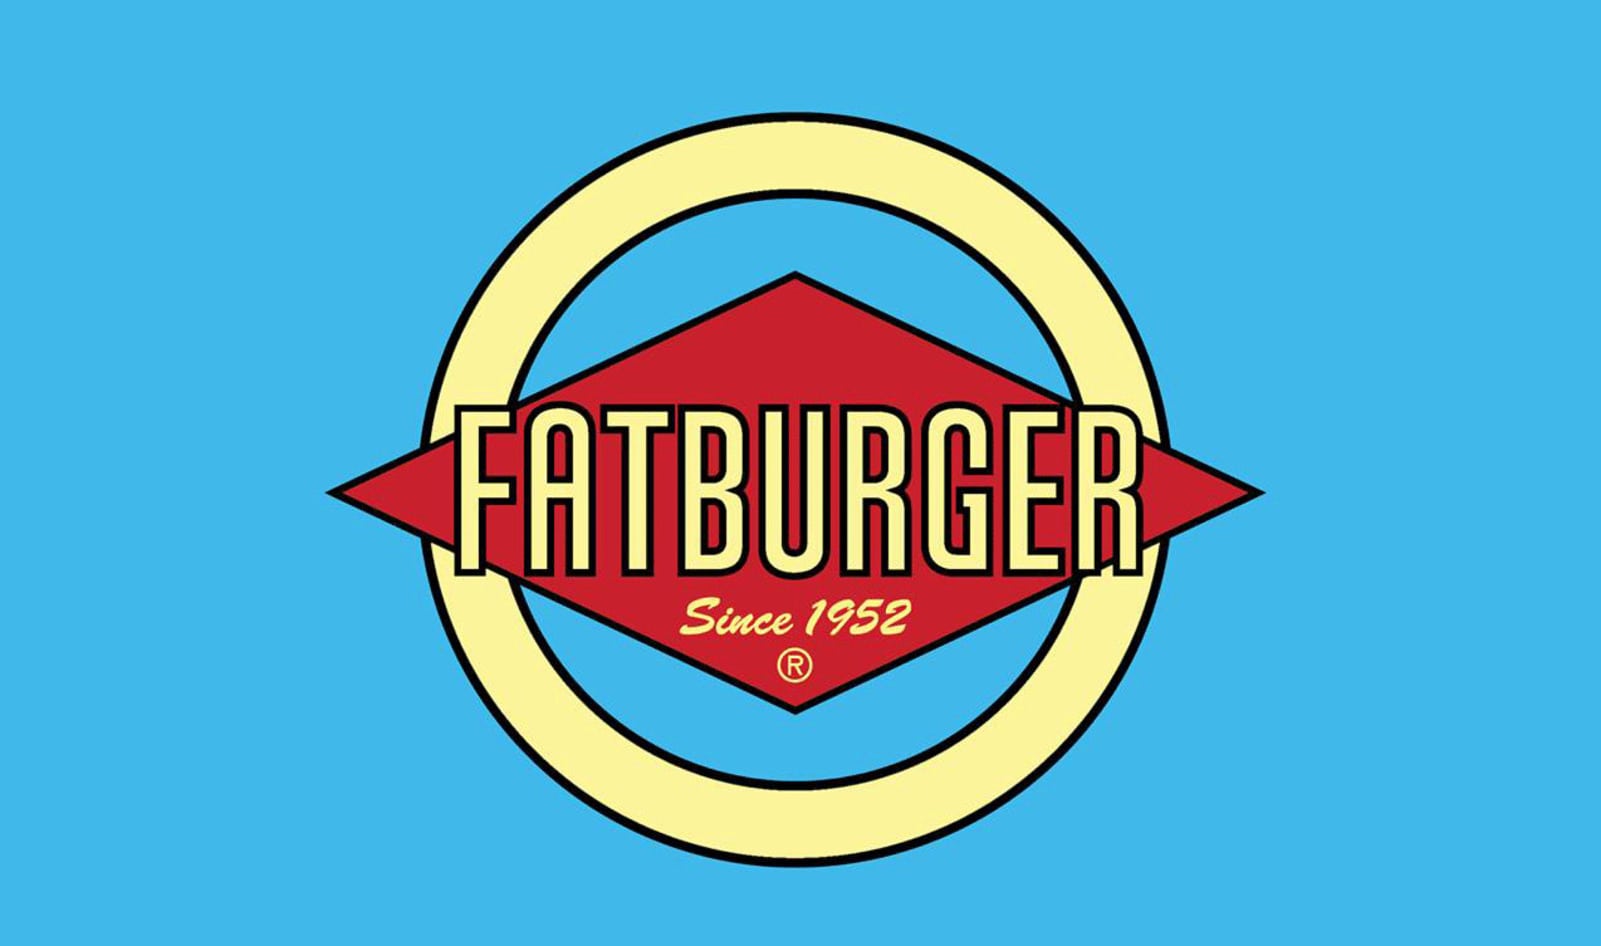 Fatburger Expands Vegan Cheeseburger to All Locations Nationwide